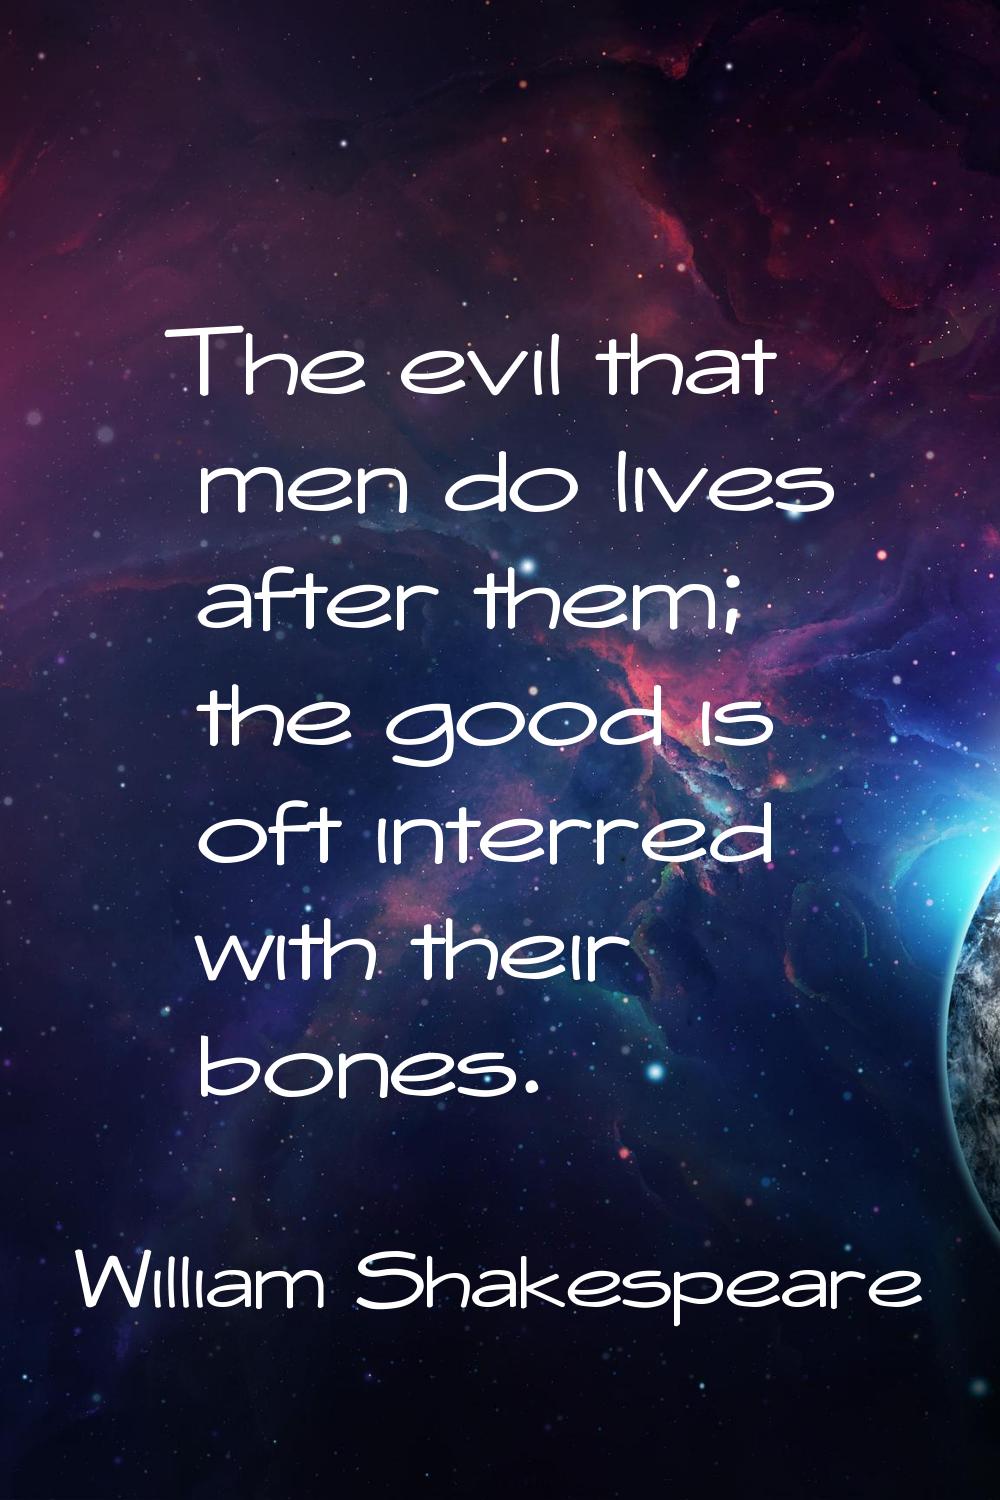 The evil that men do lives after them; the good is oft interred with their bones.